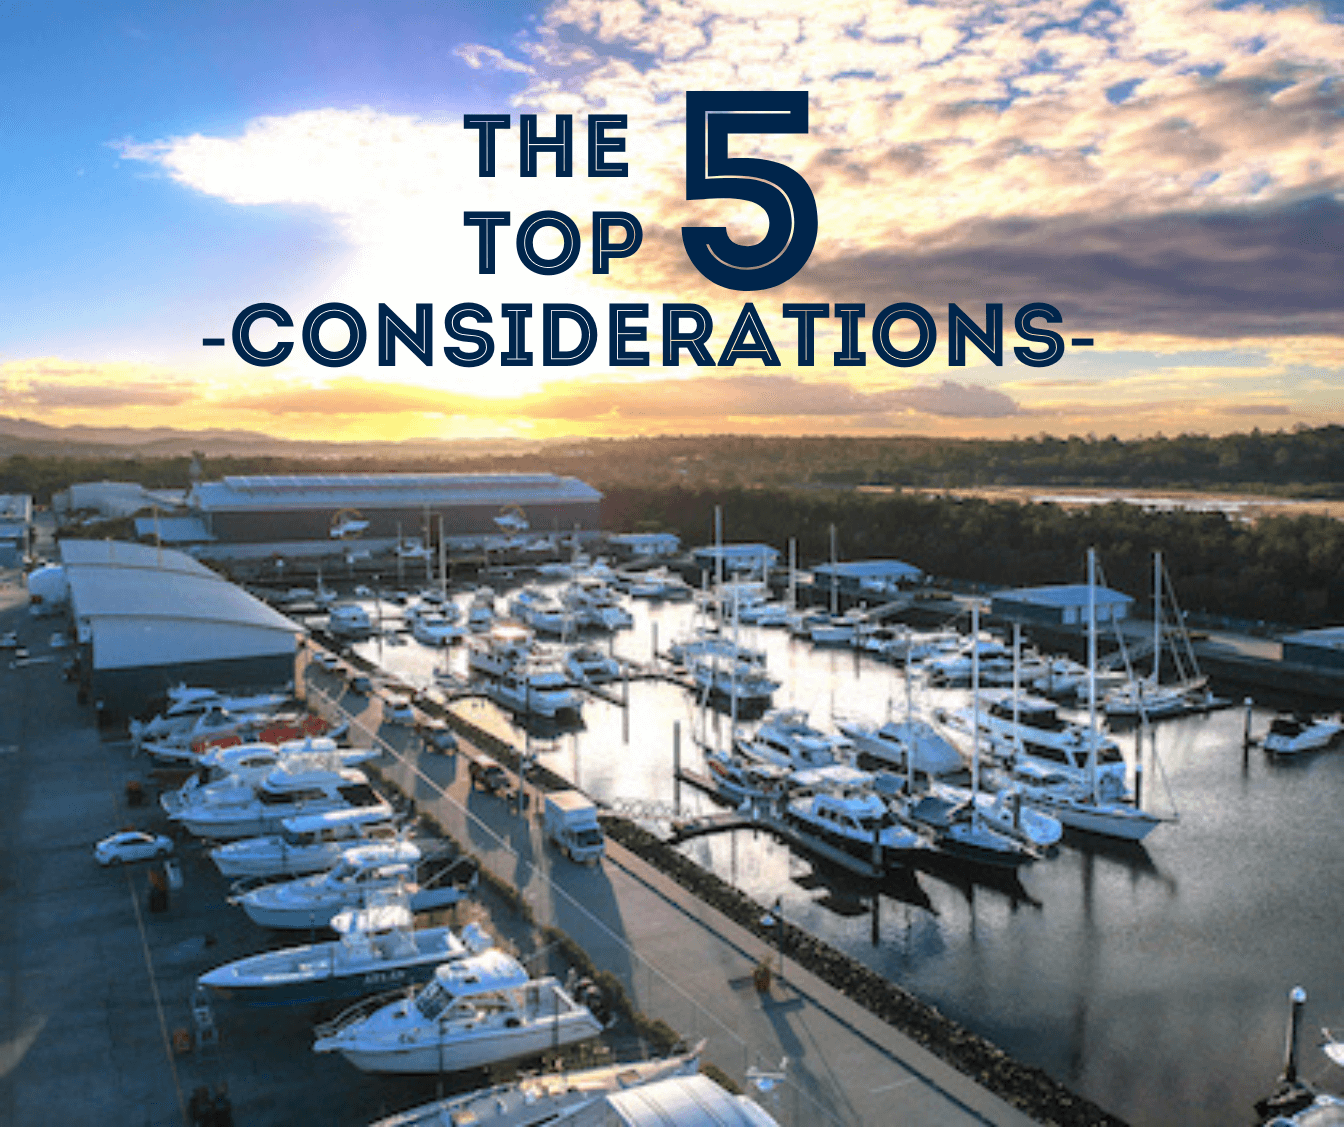 How to choose a marina for your boat?